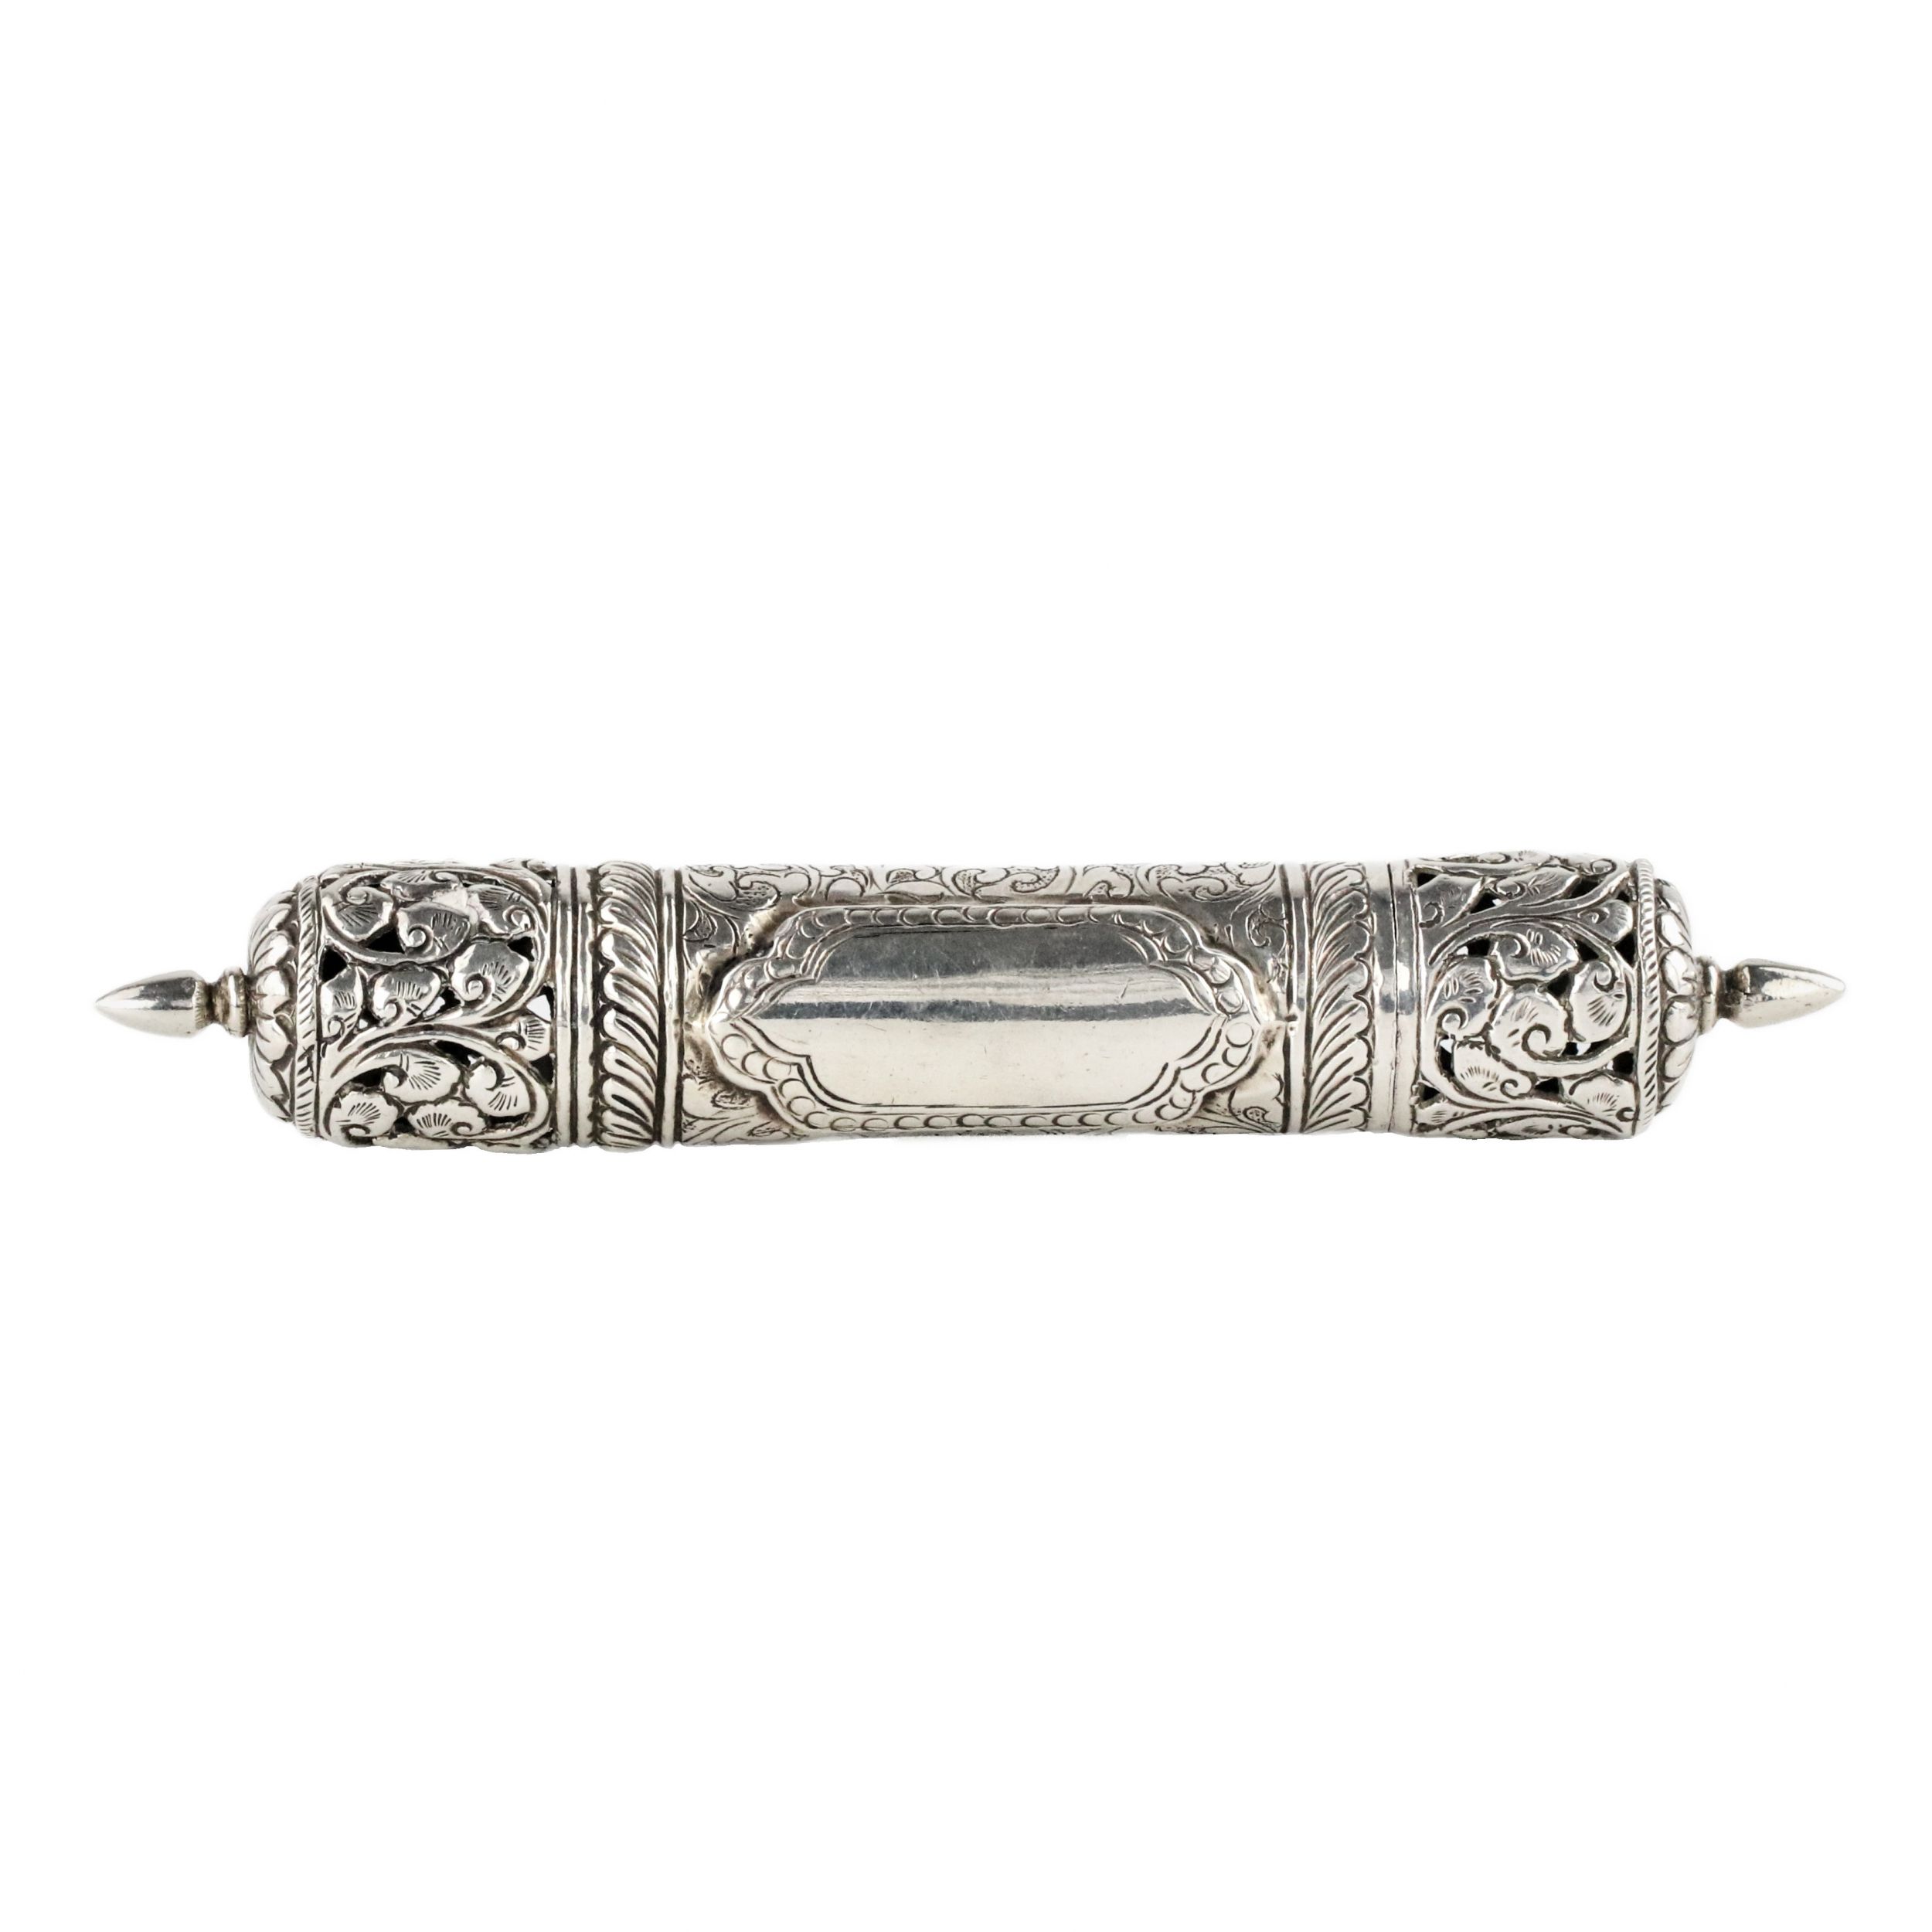 Cylindrical-Megillah-case-in-openwork-silver-with-floral-motifs-